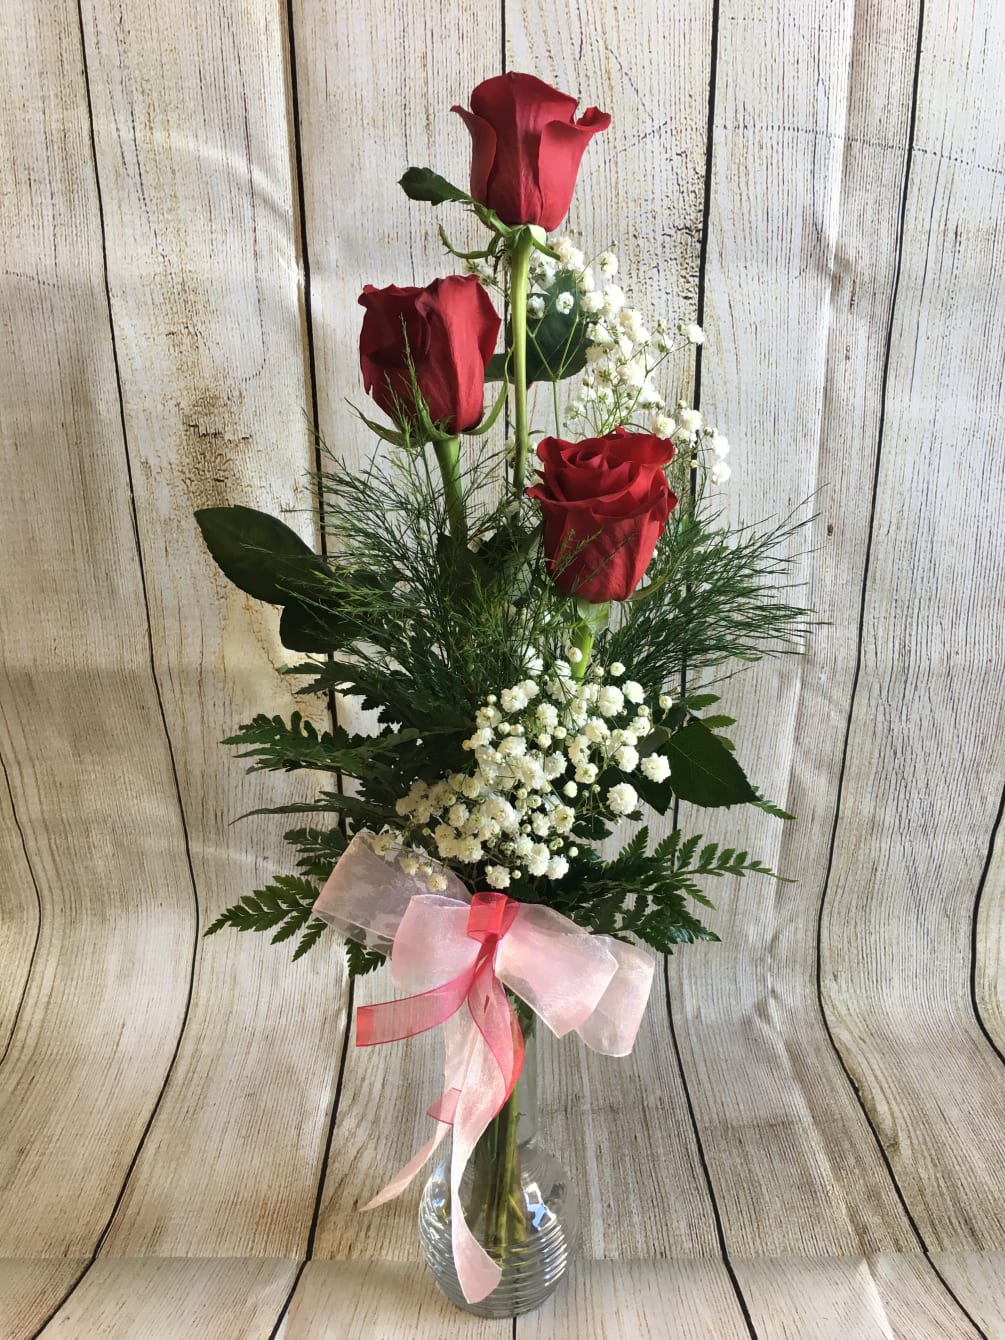 3 beautiful red roses arranged in a glass vase with filler &amp;